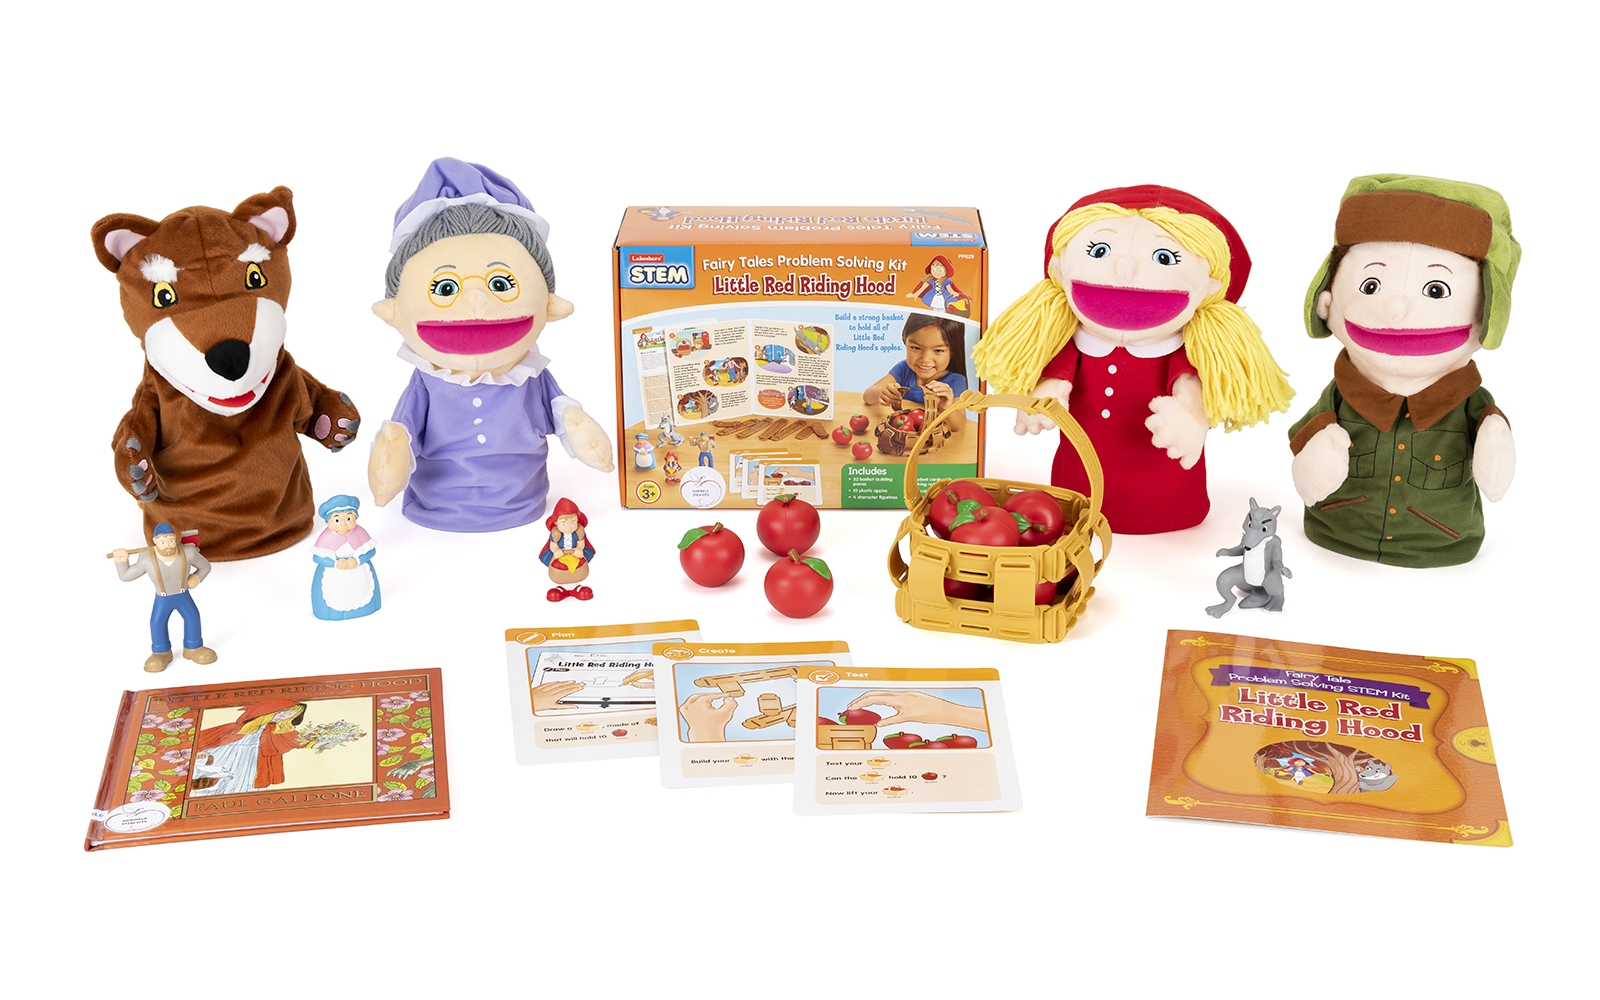 Contents of the Little Red Riding Hood Early Literacy Kit